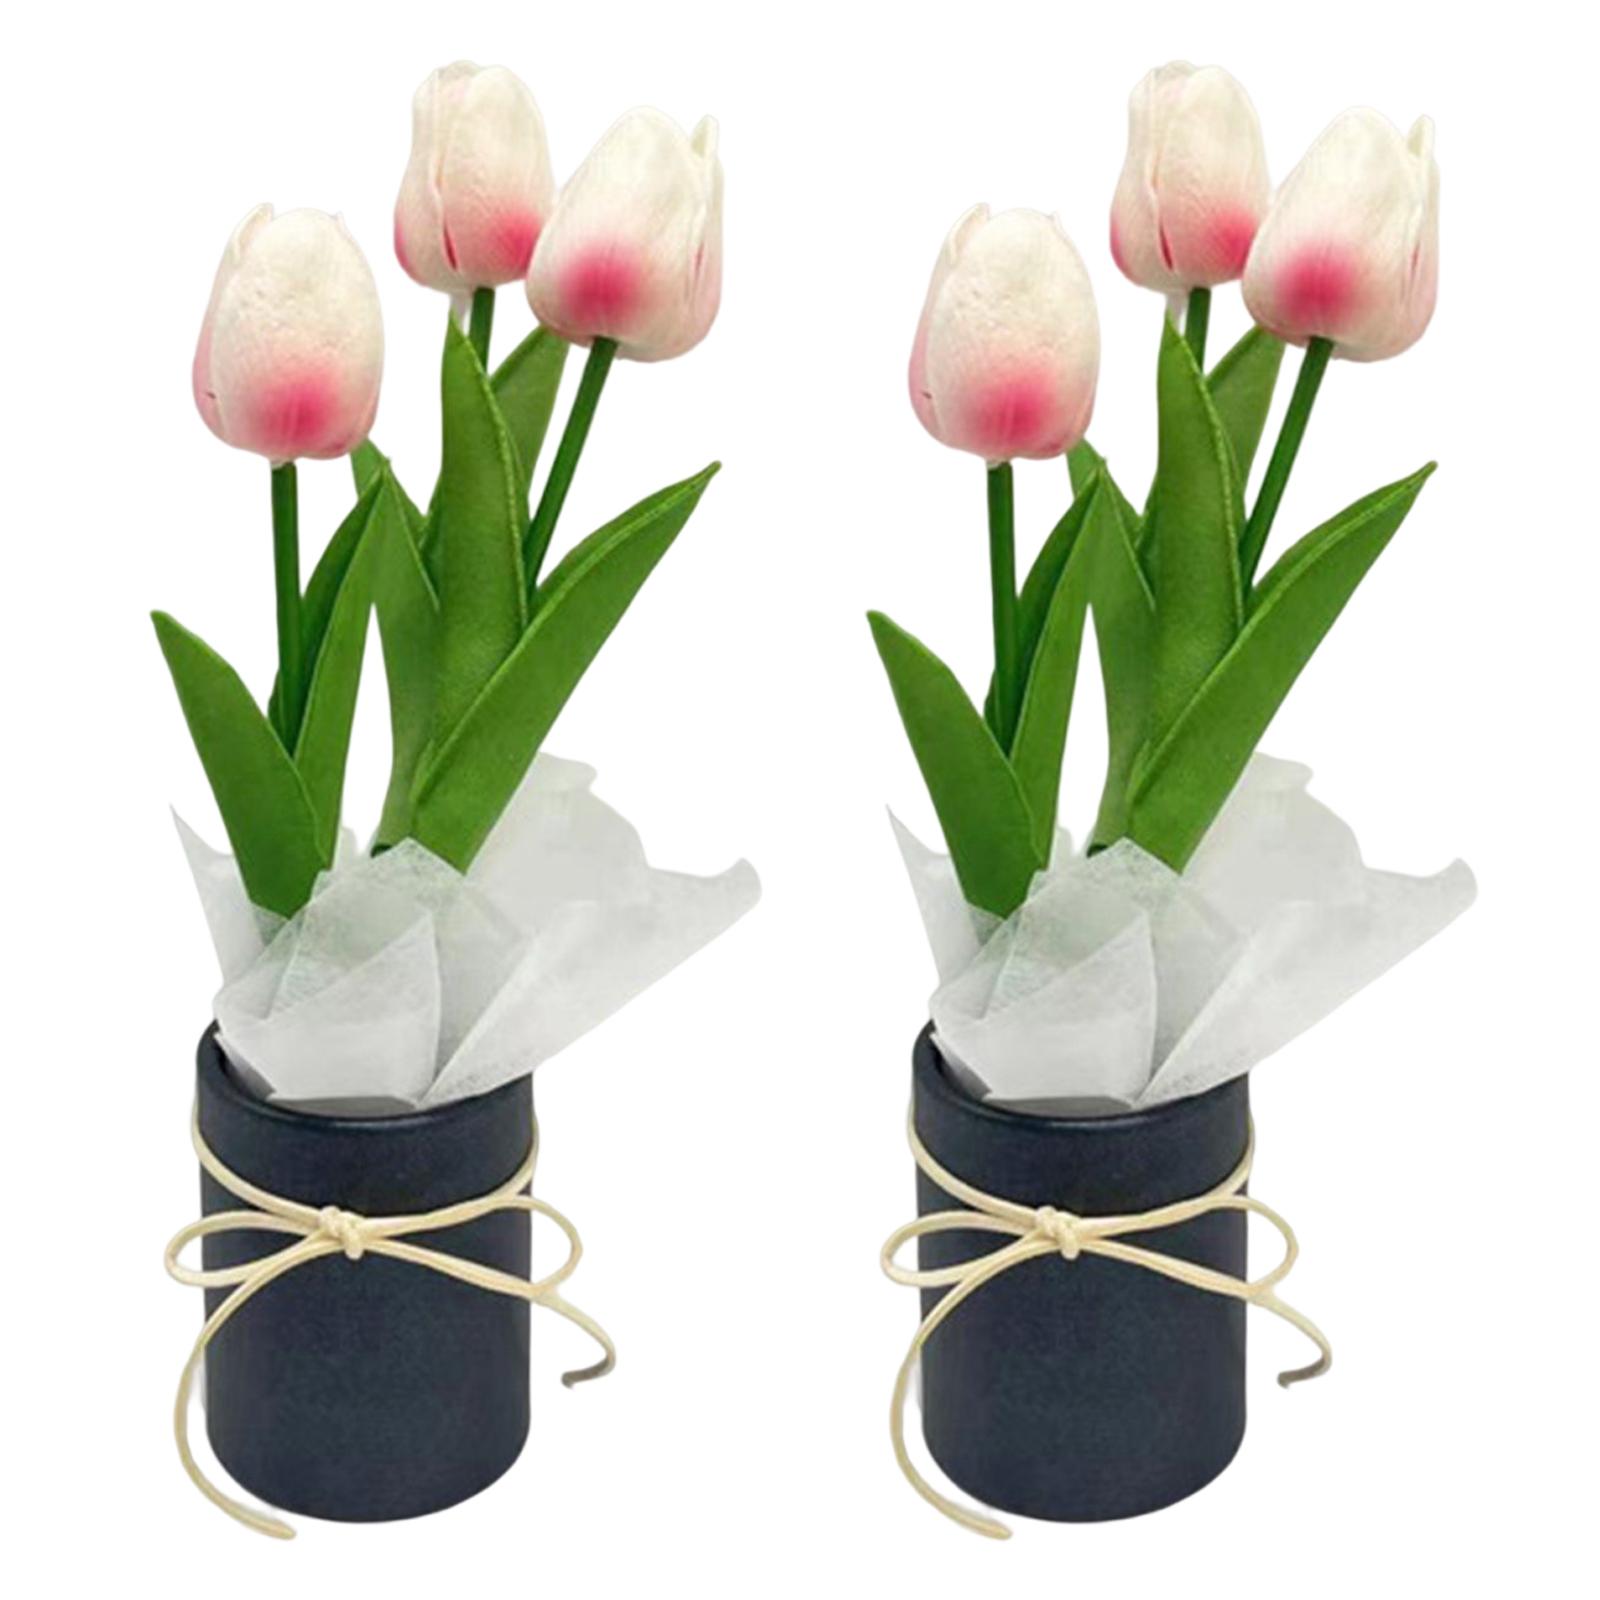 Potted Artificial Tulips Flowers DIY Bouquet Decor Light Pink